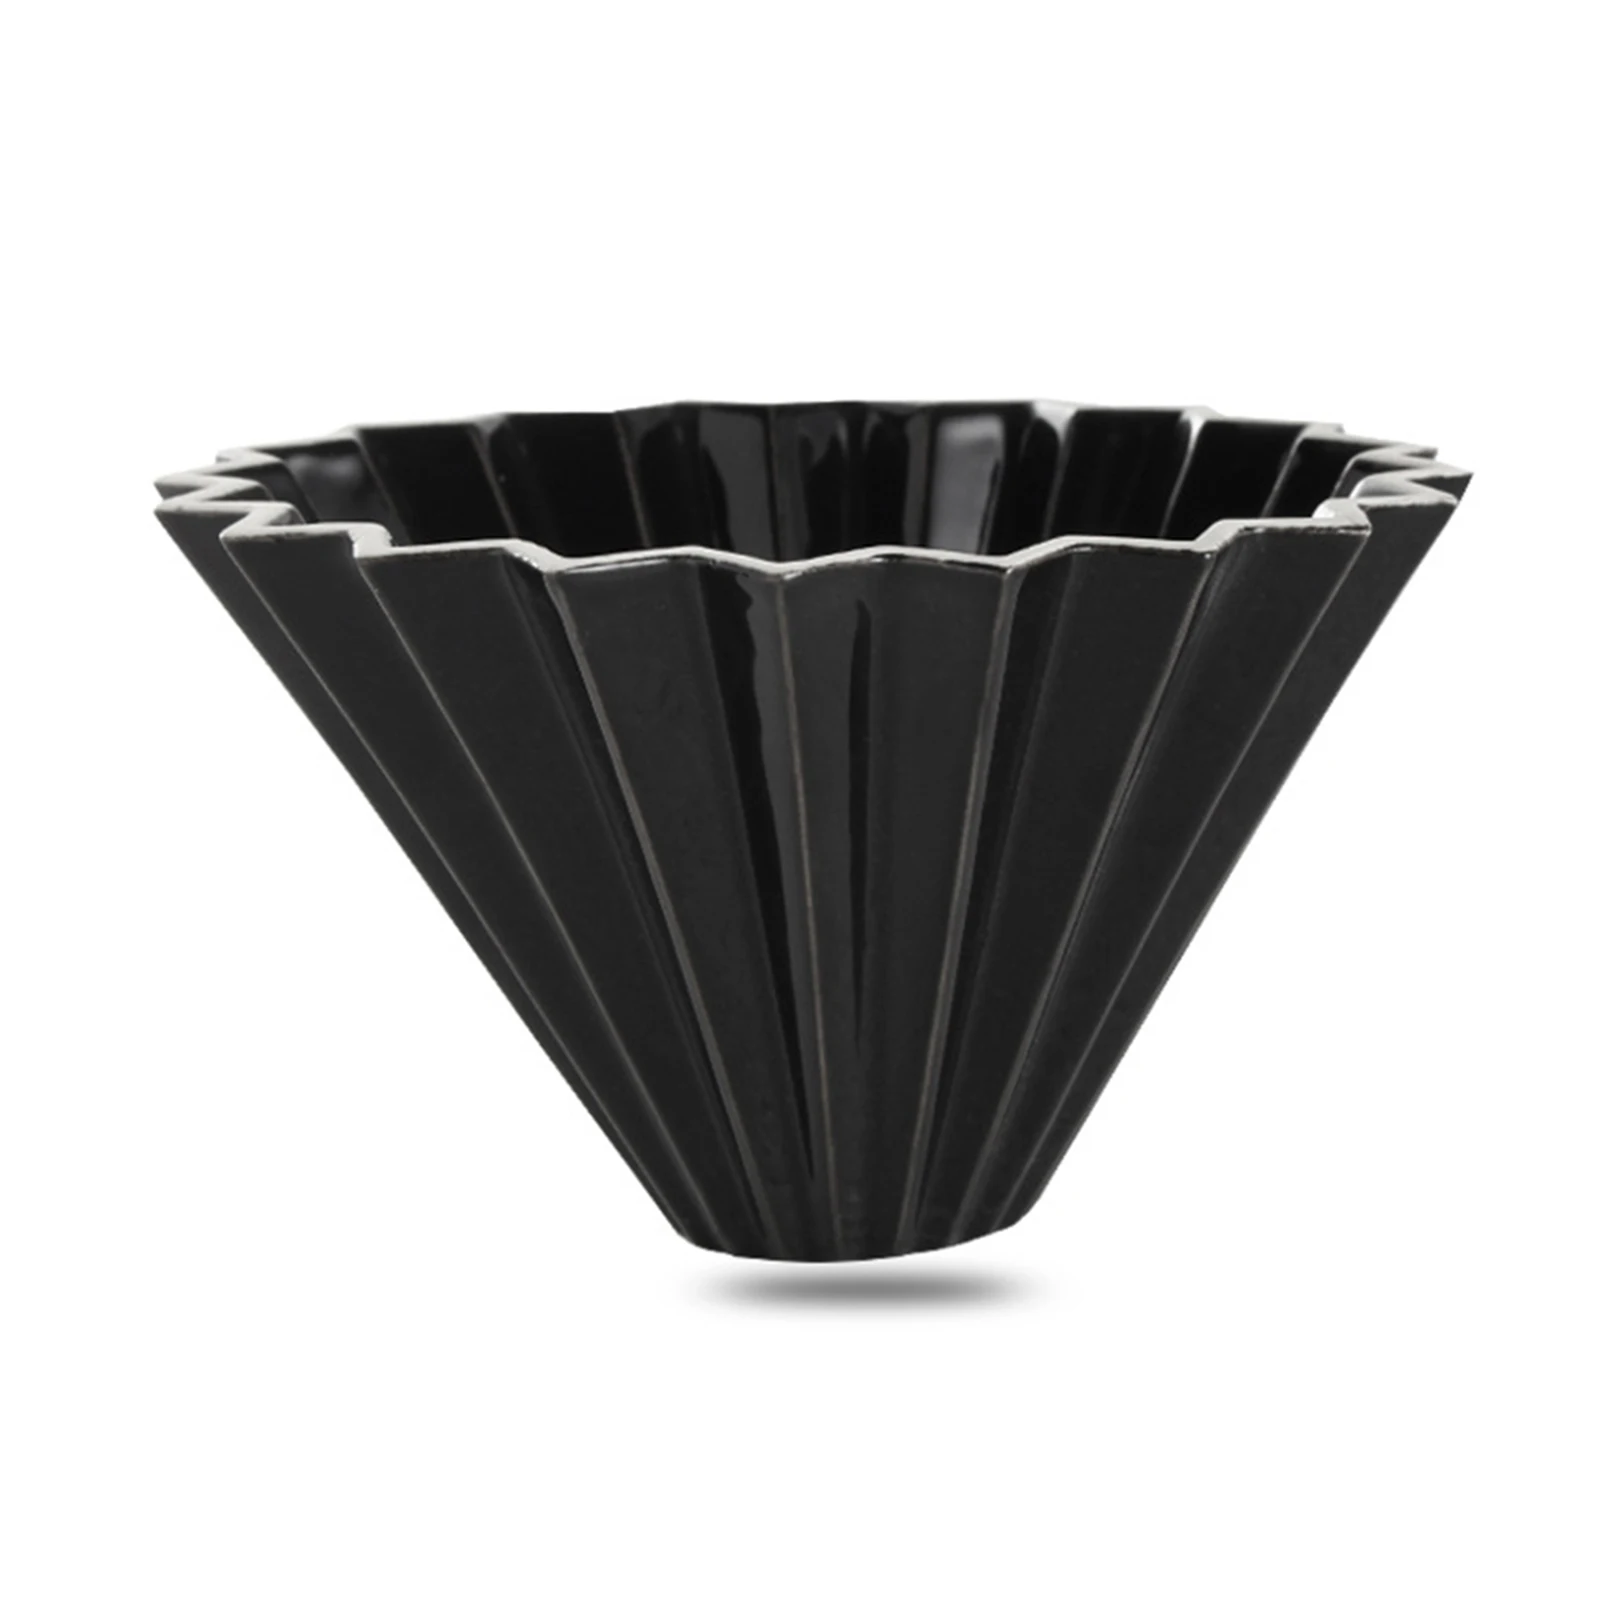 

Cafe Espresso Coffee Pour Over Home Kitchen Cone Reusable Ceramic Origami Easy Clean Solid Funnel Dripper Filter Cup Restaurant